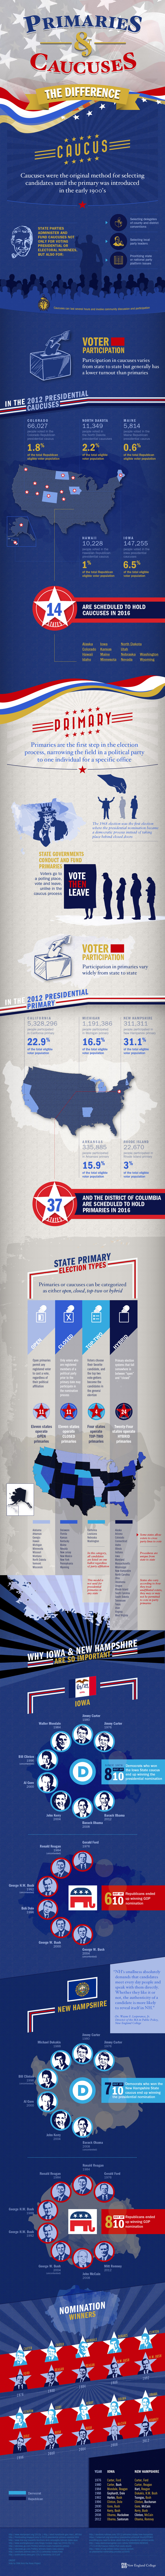 Understanding The Differences Between US Caucuses And Primary Elections